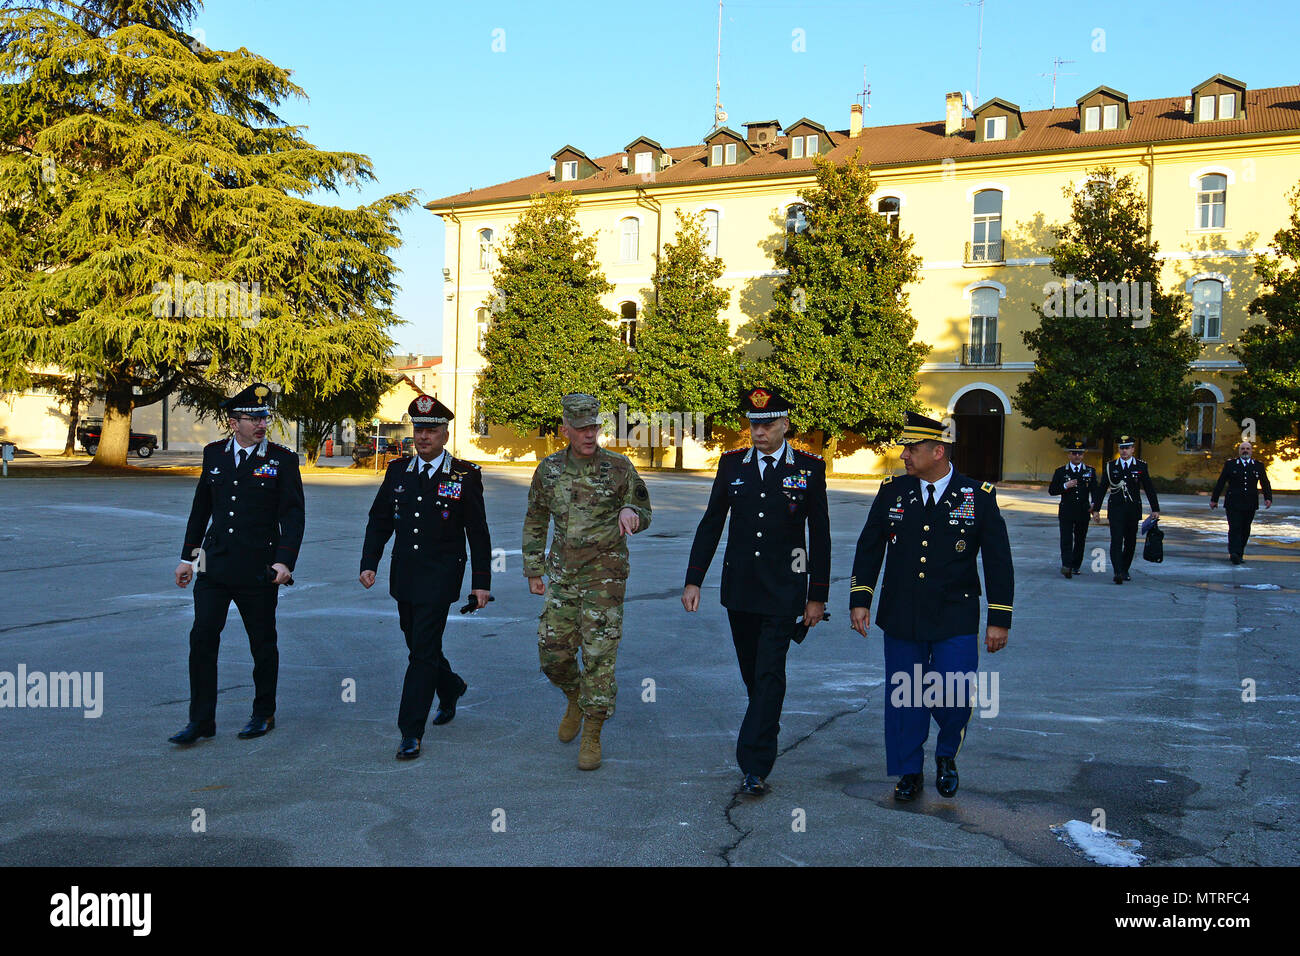 (From left), Col Pietro Carrozza, Carabinieri HQ Chief of plans and Military Police, Brig. Gen. Giovanni Pietro Barbano, Center of Excellence for Stability Police Units (CoESPU) director, Lt. Gen. Charles D. Luckey, Commanding General U.S. Army Reserve Command, Lt. Gen Vincenzo Coppola, Commanding General “Palidoro” Carabinieri Specialized and Mobile Units, U.S. Army Col. Darius S. Gallegos, CoESPU deputy director during visit at Center of Excellence for Stability Police Units (CoESPU) Vicenza, Italy, January 20, 2017.(U.S. Army Photo by Visual Information Specialist Paolo Bovo/released) Stock Photo